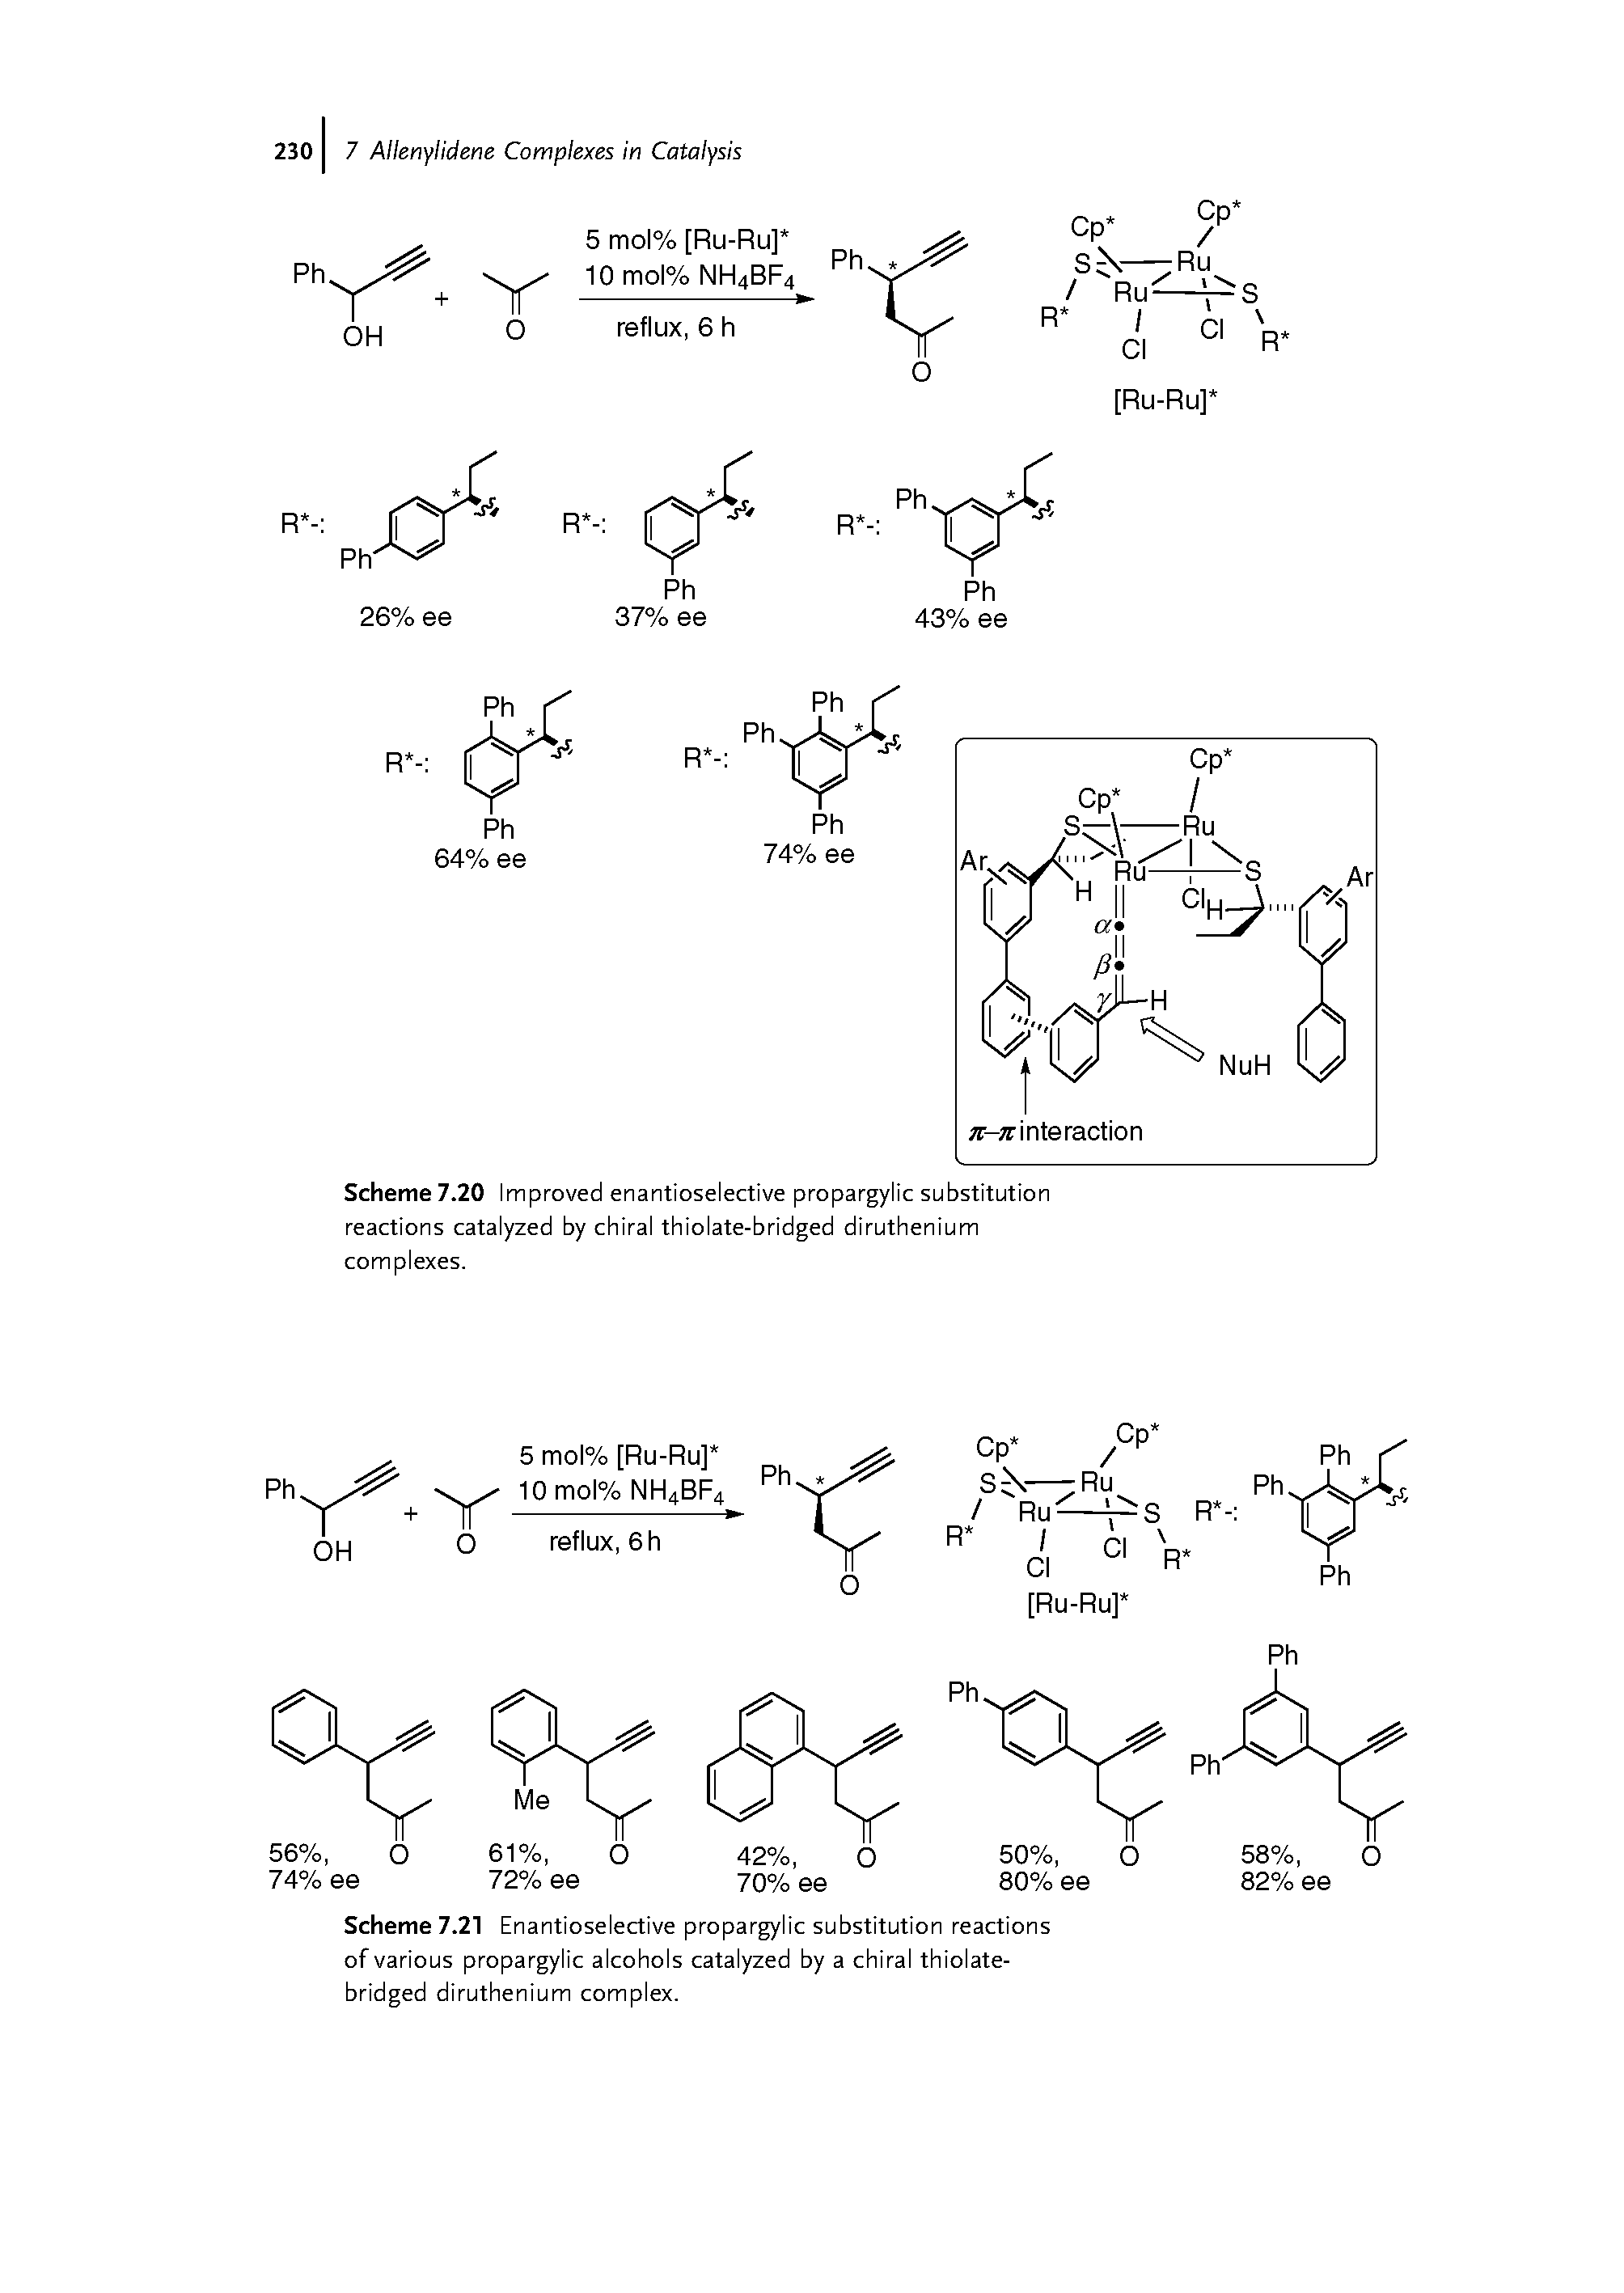 Scheme 7.21 Enantioselective propargylic substitution reactions of various propargylic alcohols catalyzed by a chiral thiolate-bridged diruthenium complex.